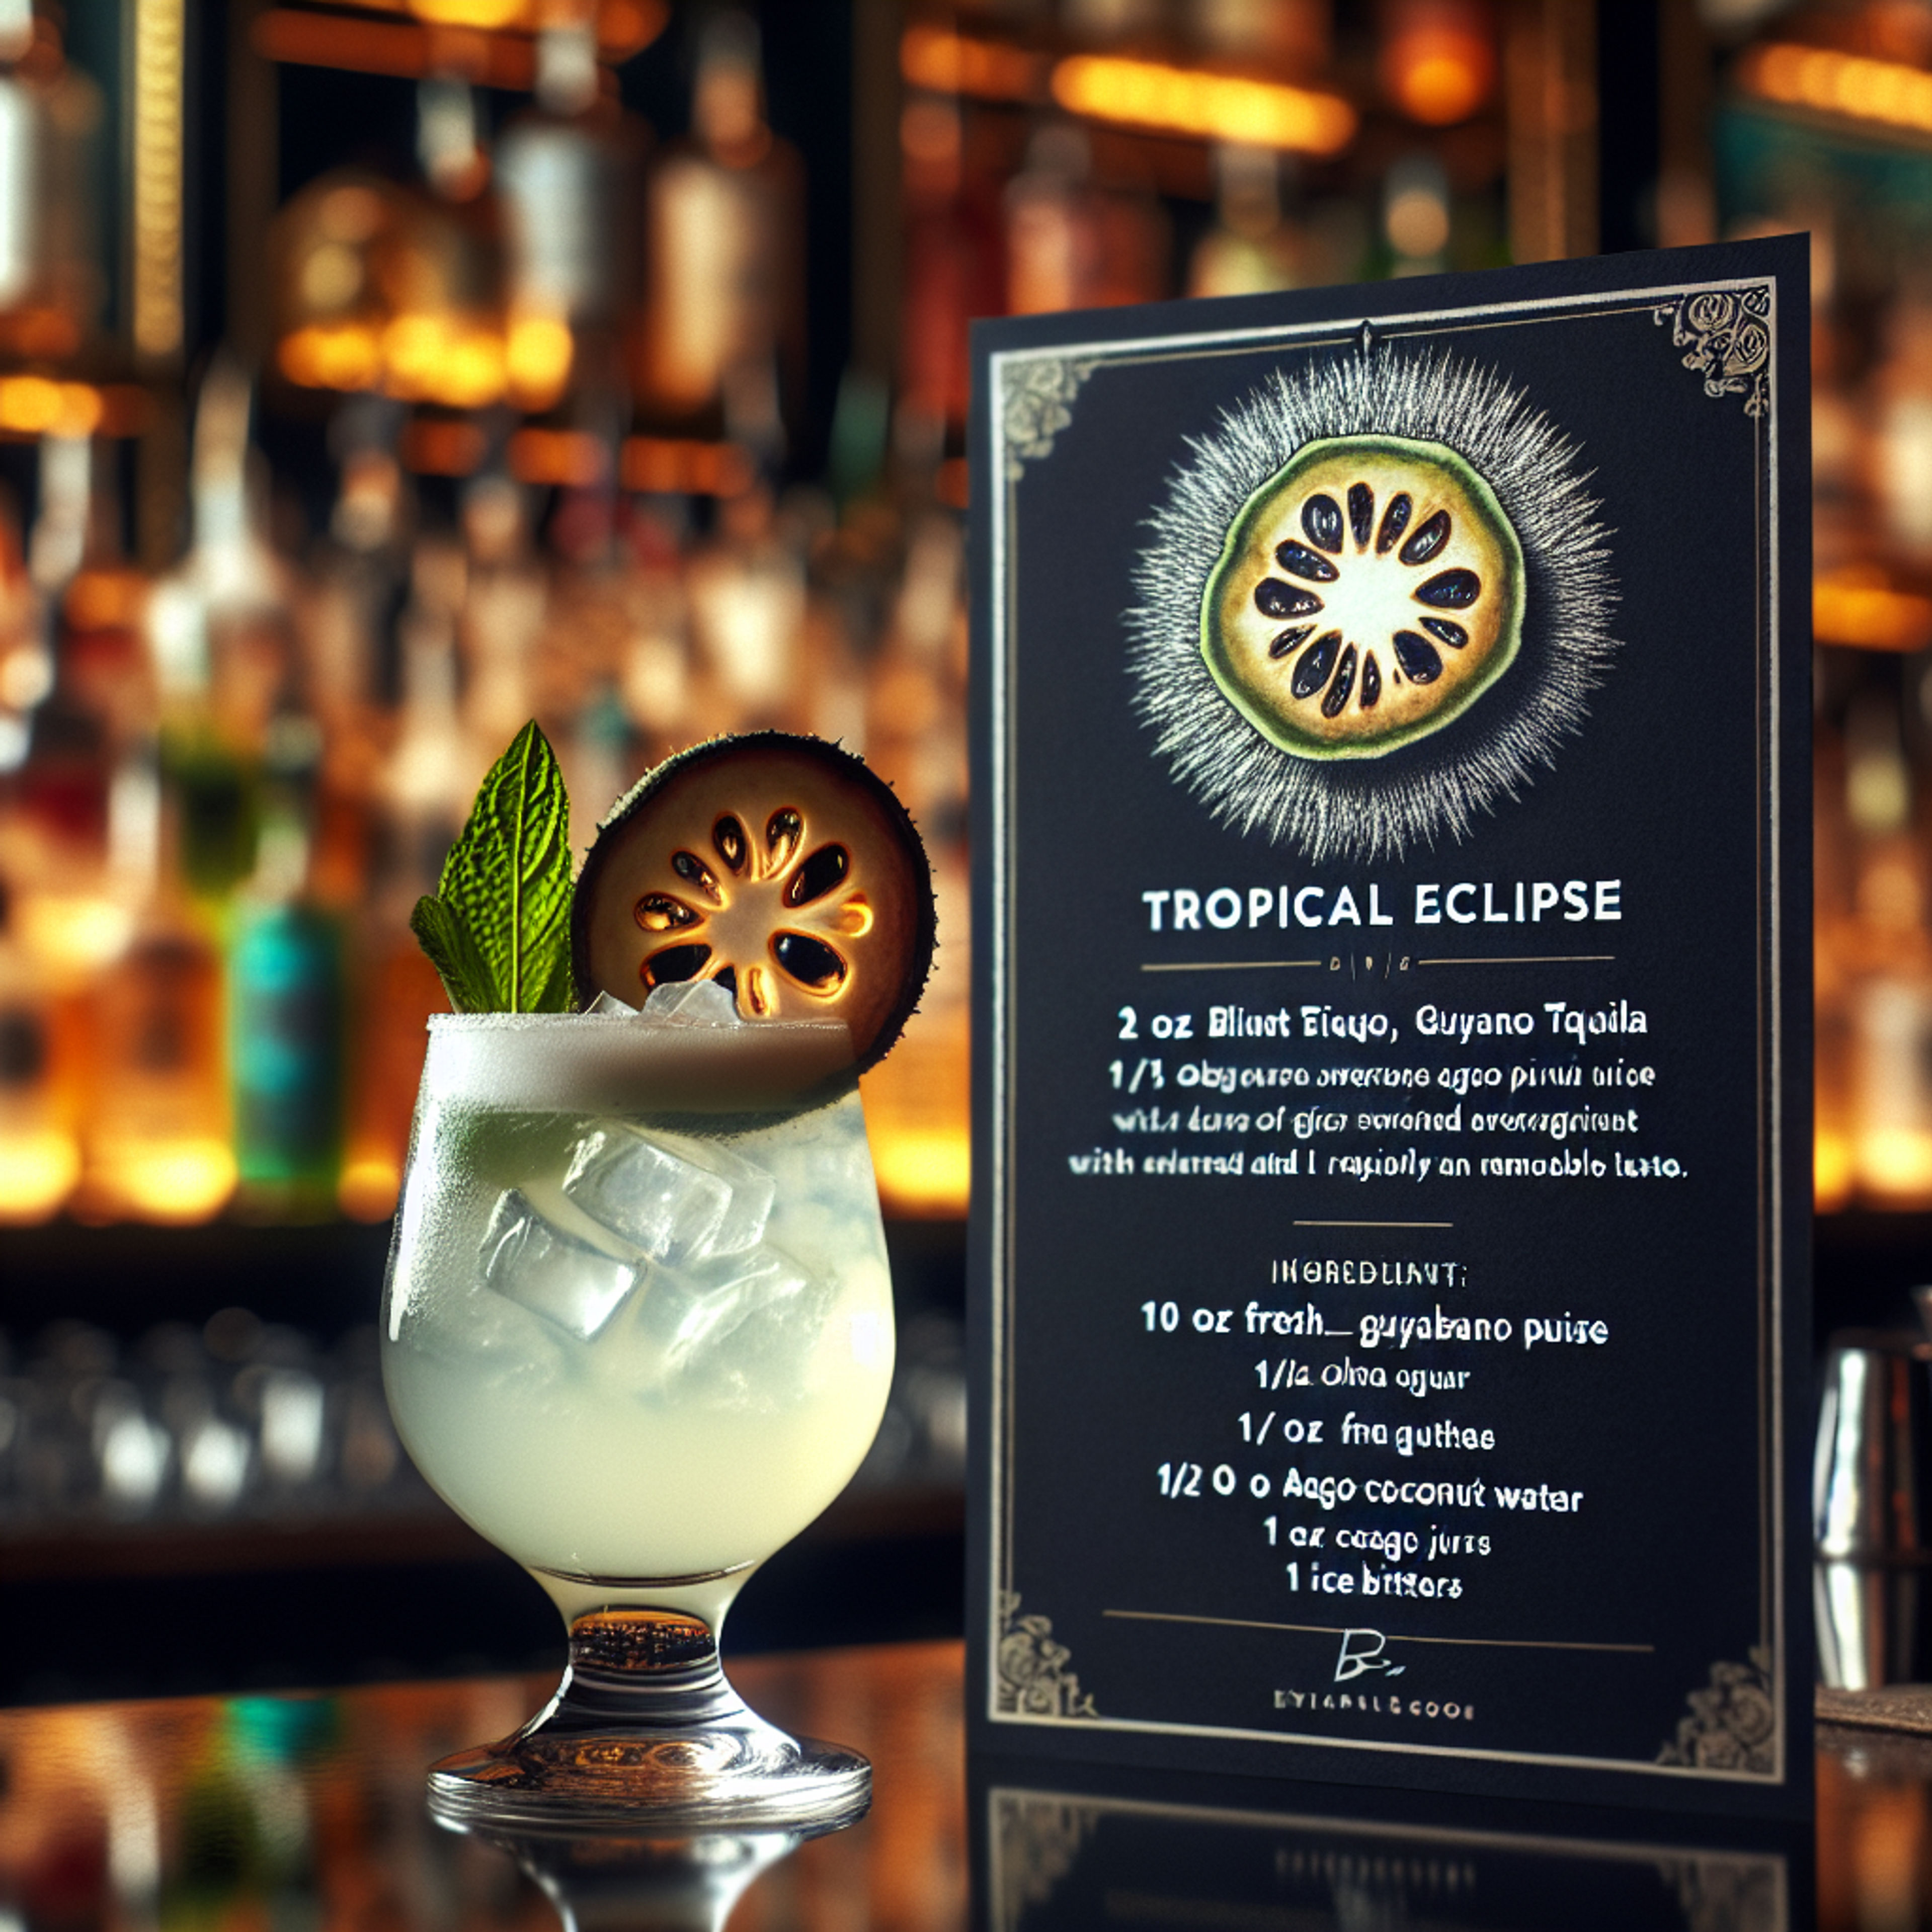 Tropical Eclipse